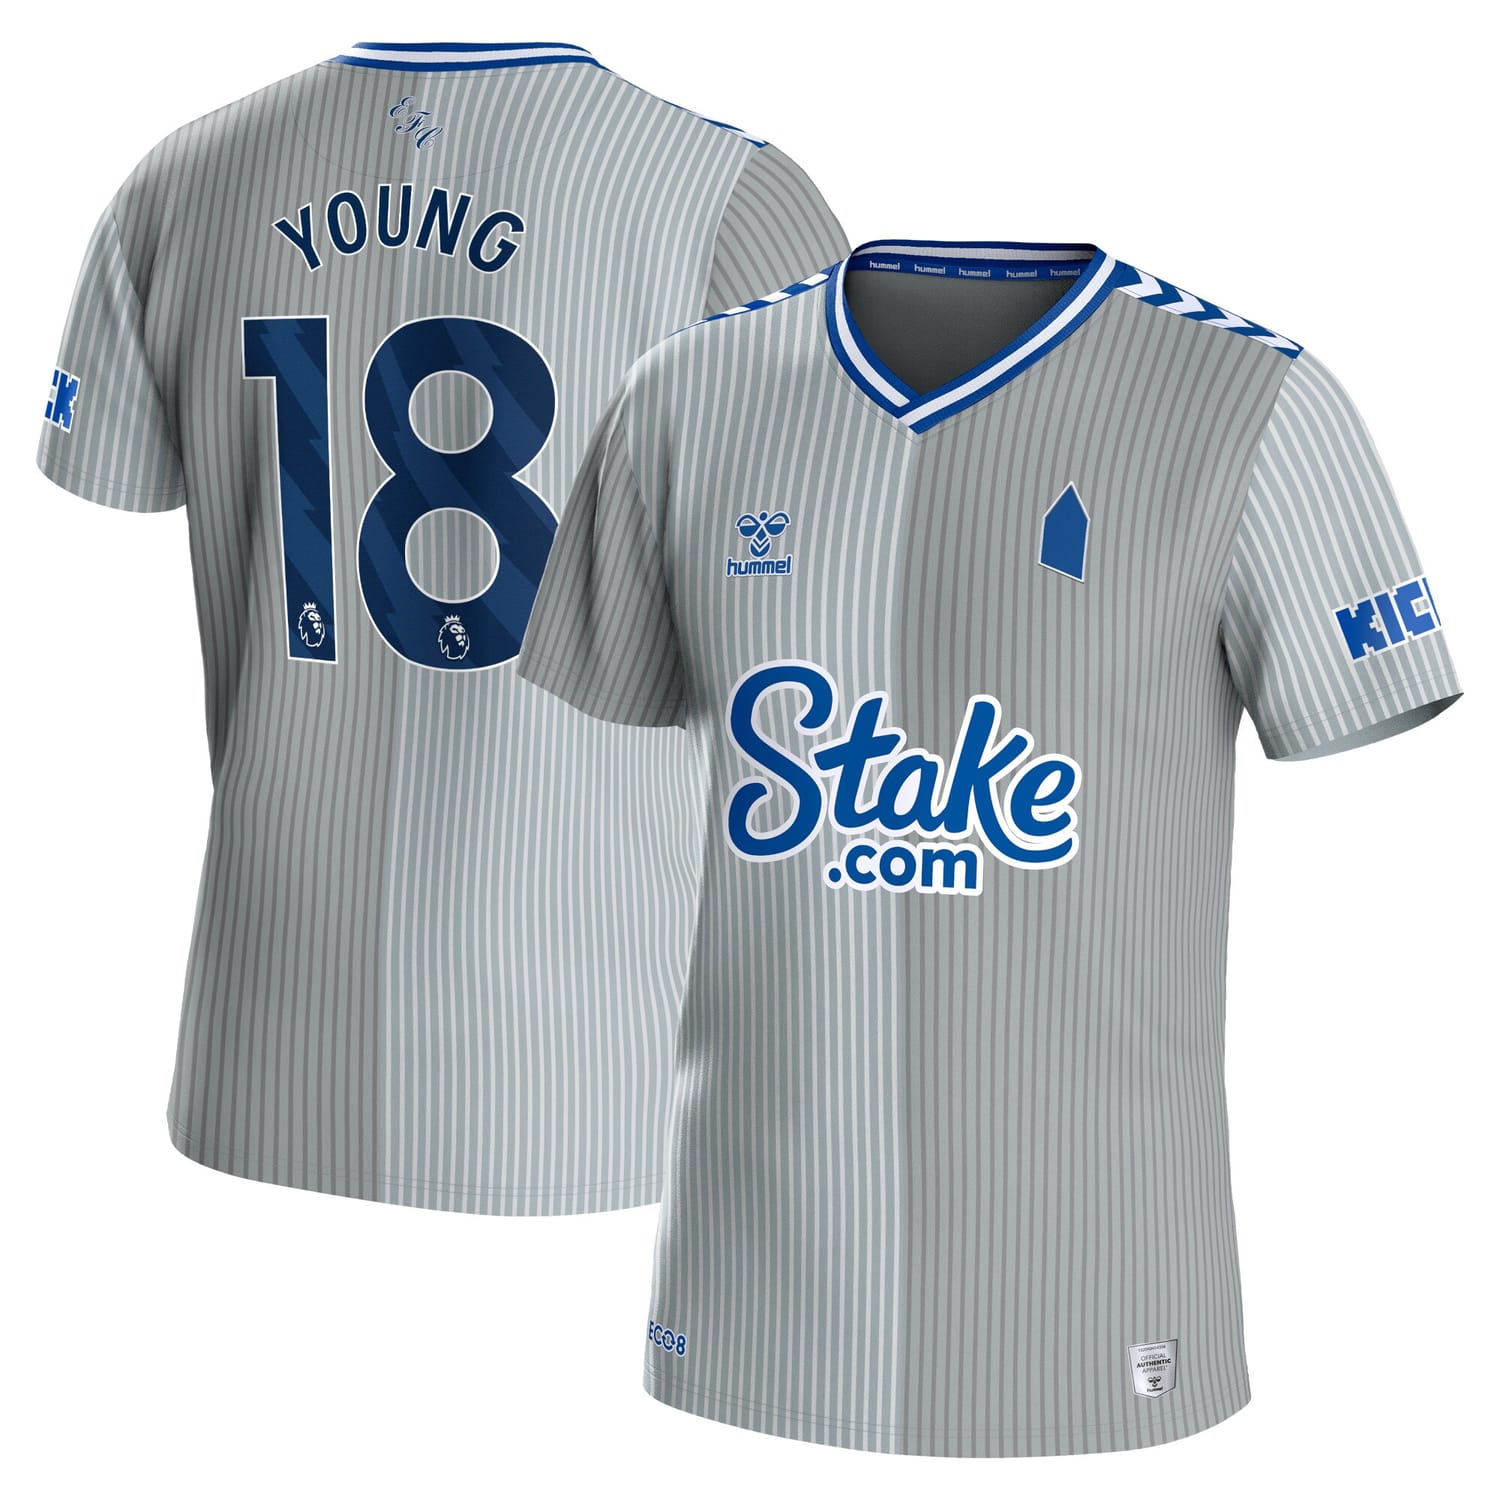 Premier League Everton Third Jersey Shirt 2023-24 player Ashley Young 18 printing for Men